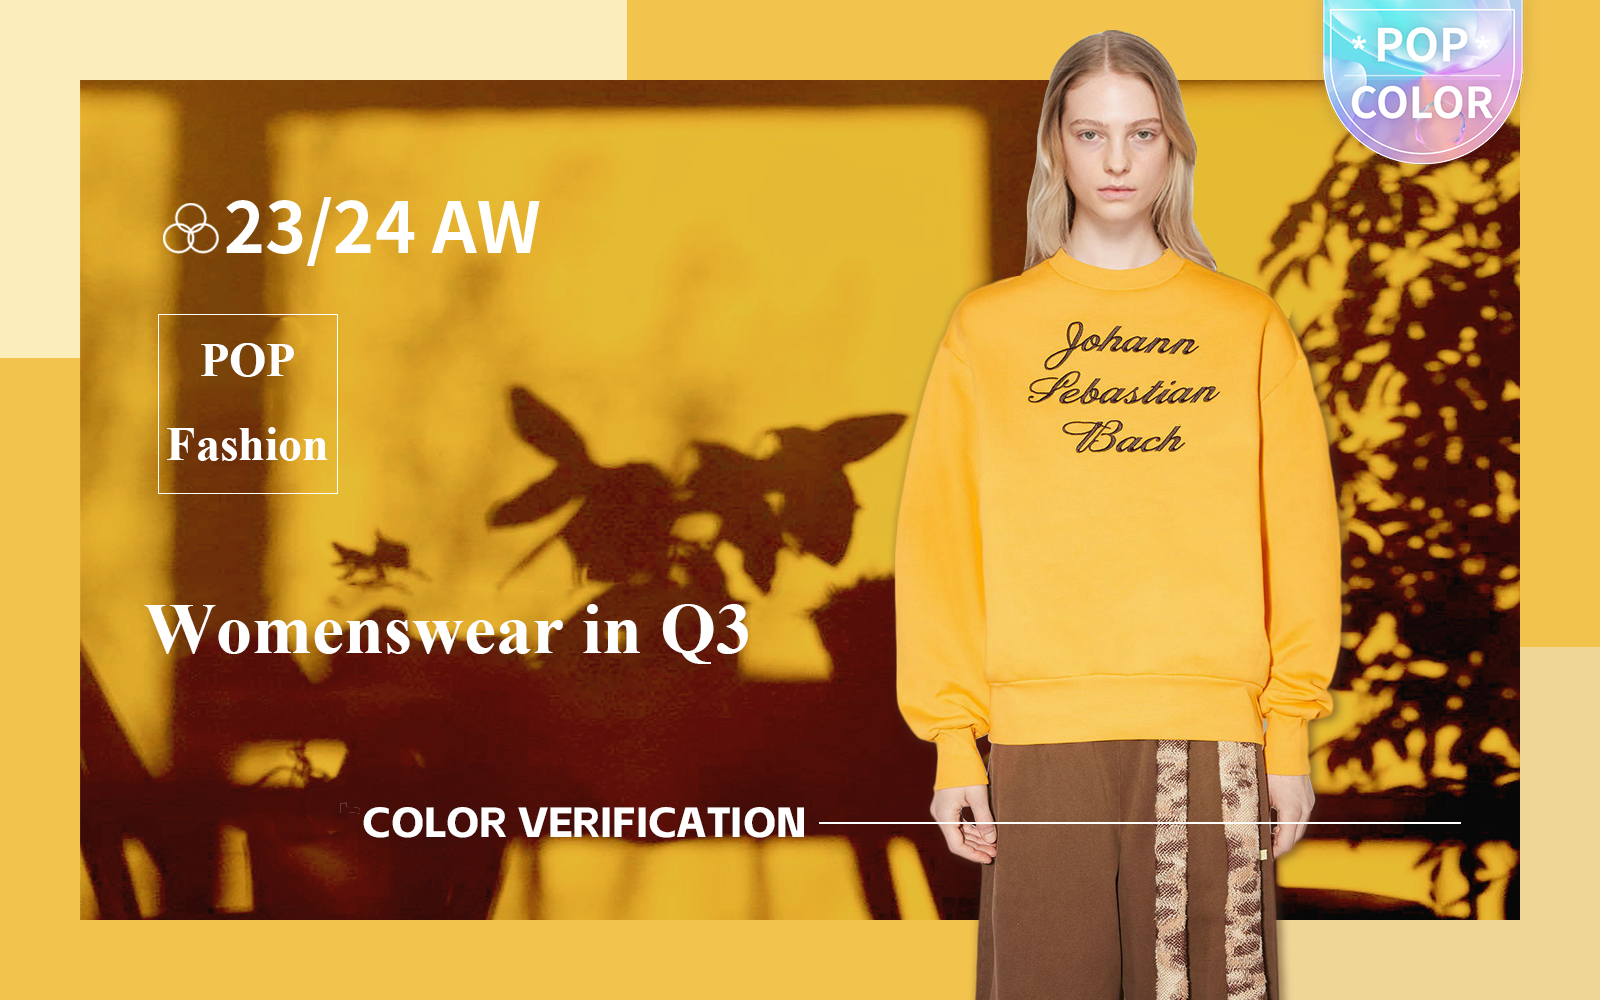 The Color Trend Verification of Womenswear Market in Q3